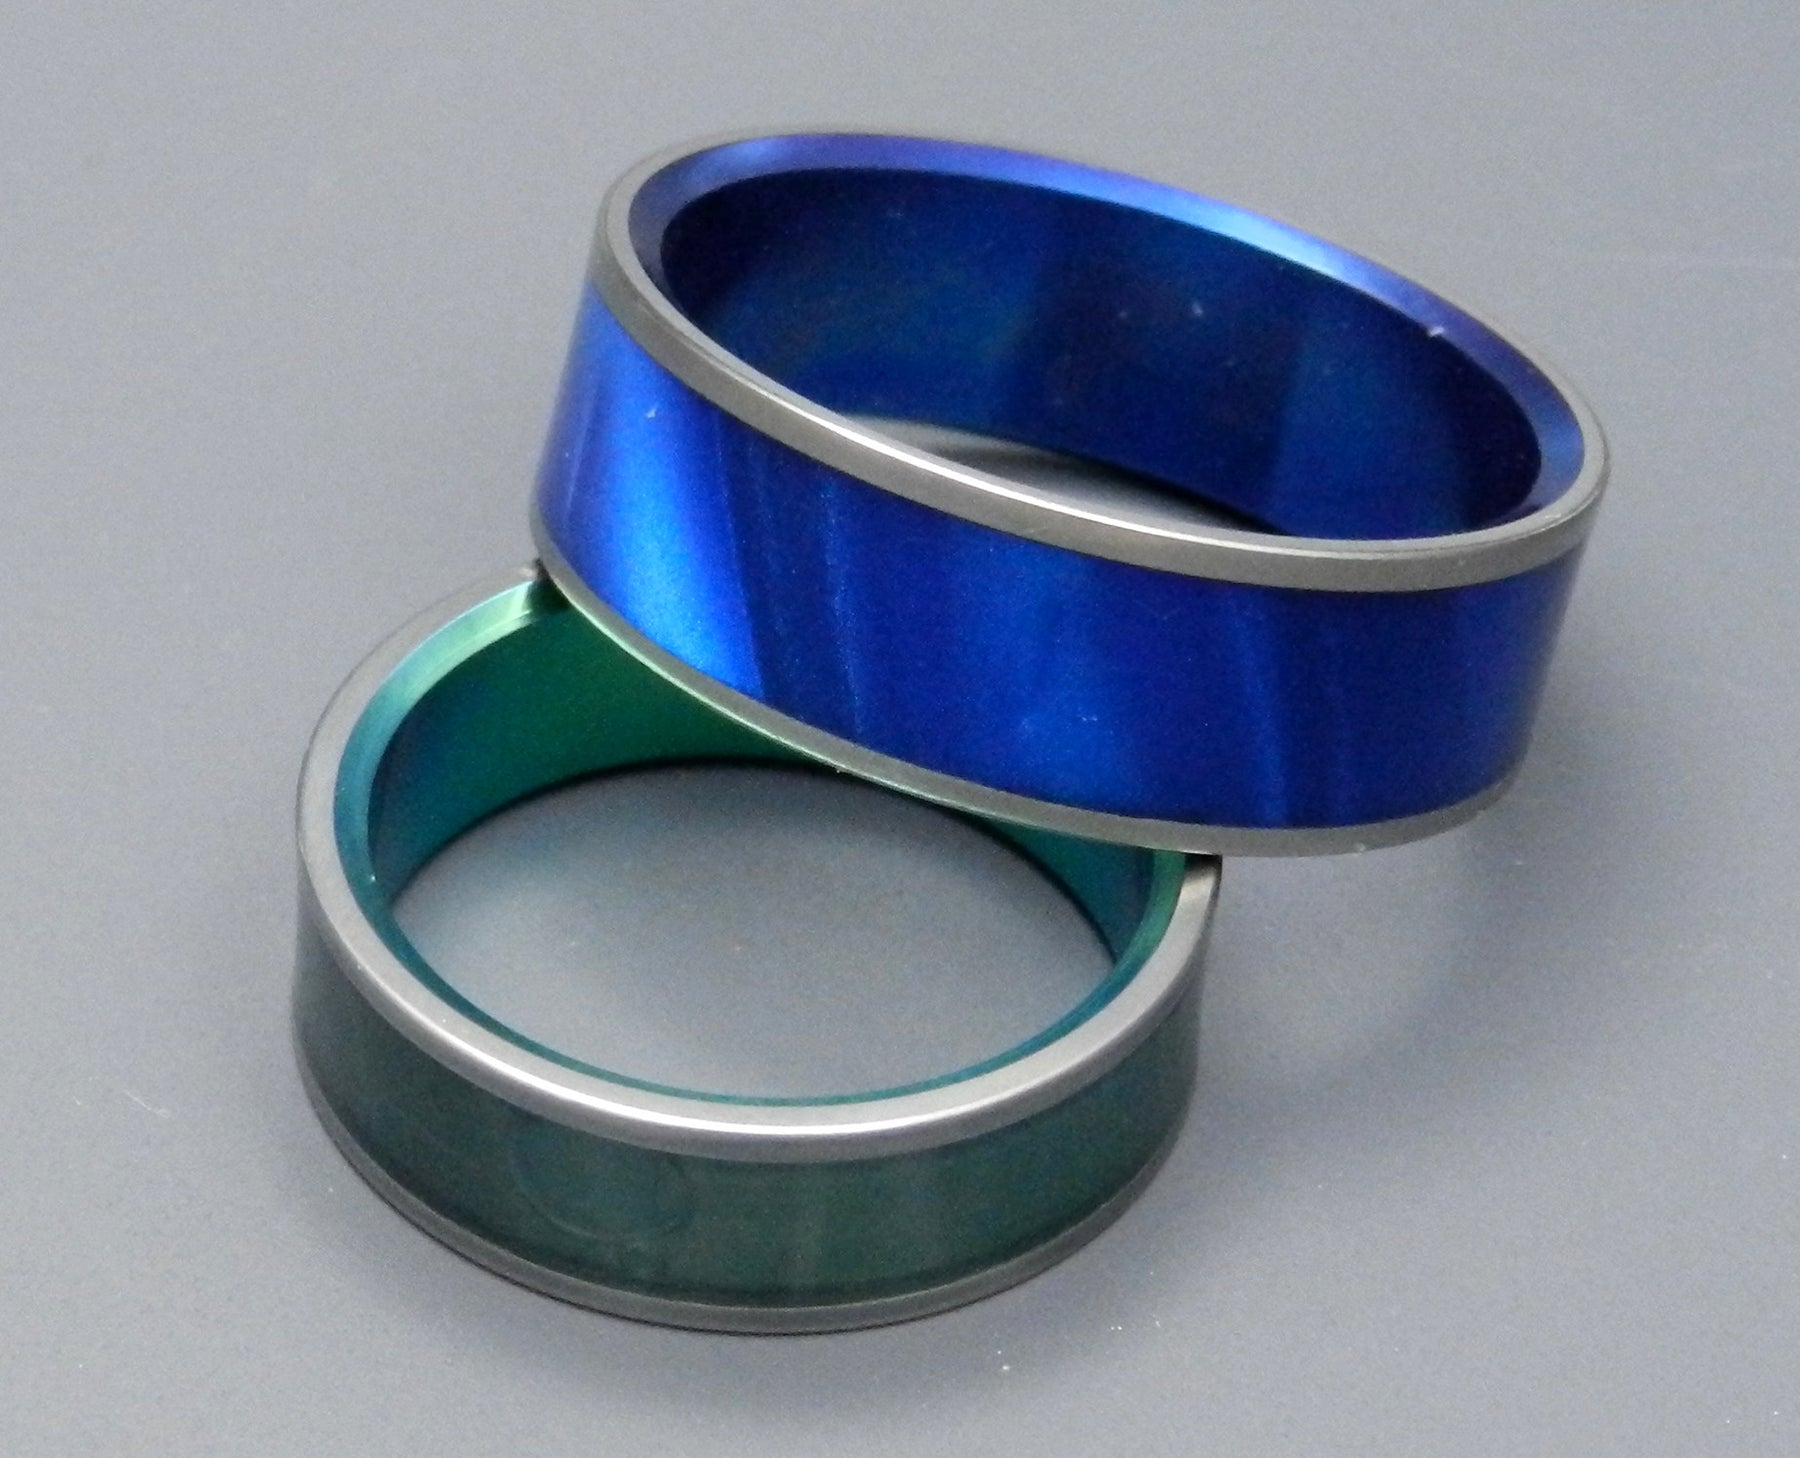 MIDNIGHT & SEA MOSS | Blue & Green Marbled Opalescent Resin - His &Hers Titanium Wedding Band Set - Minter and Richter Designs